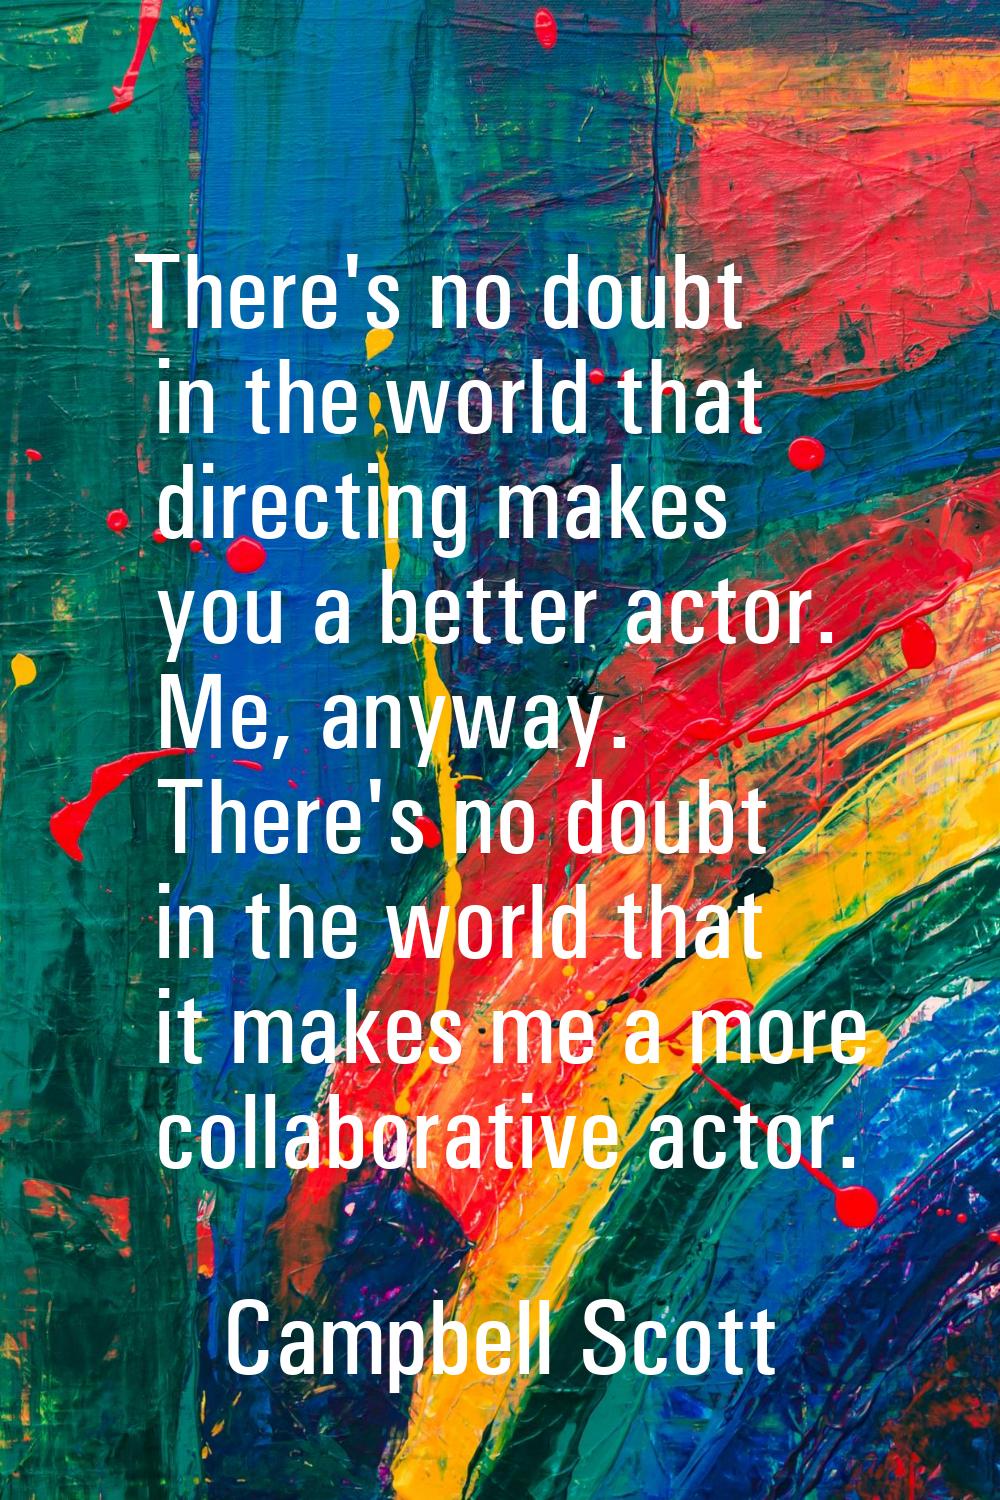 There's no doubt in the world that directing makes you a better actor. Me, anyway. There's no doubt